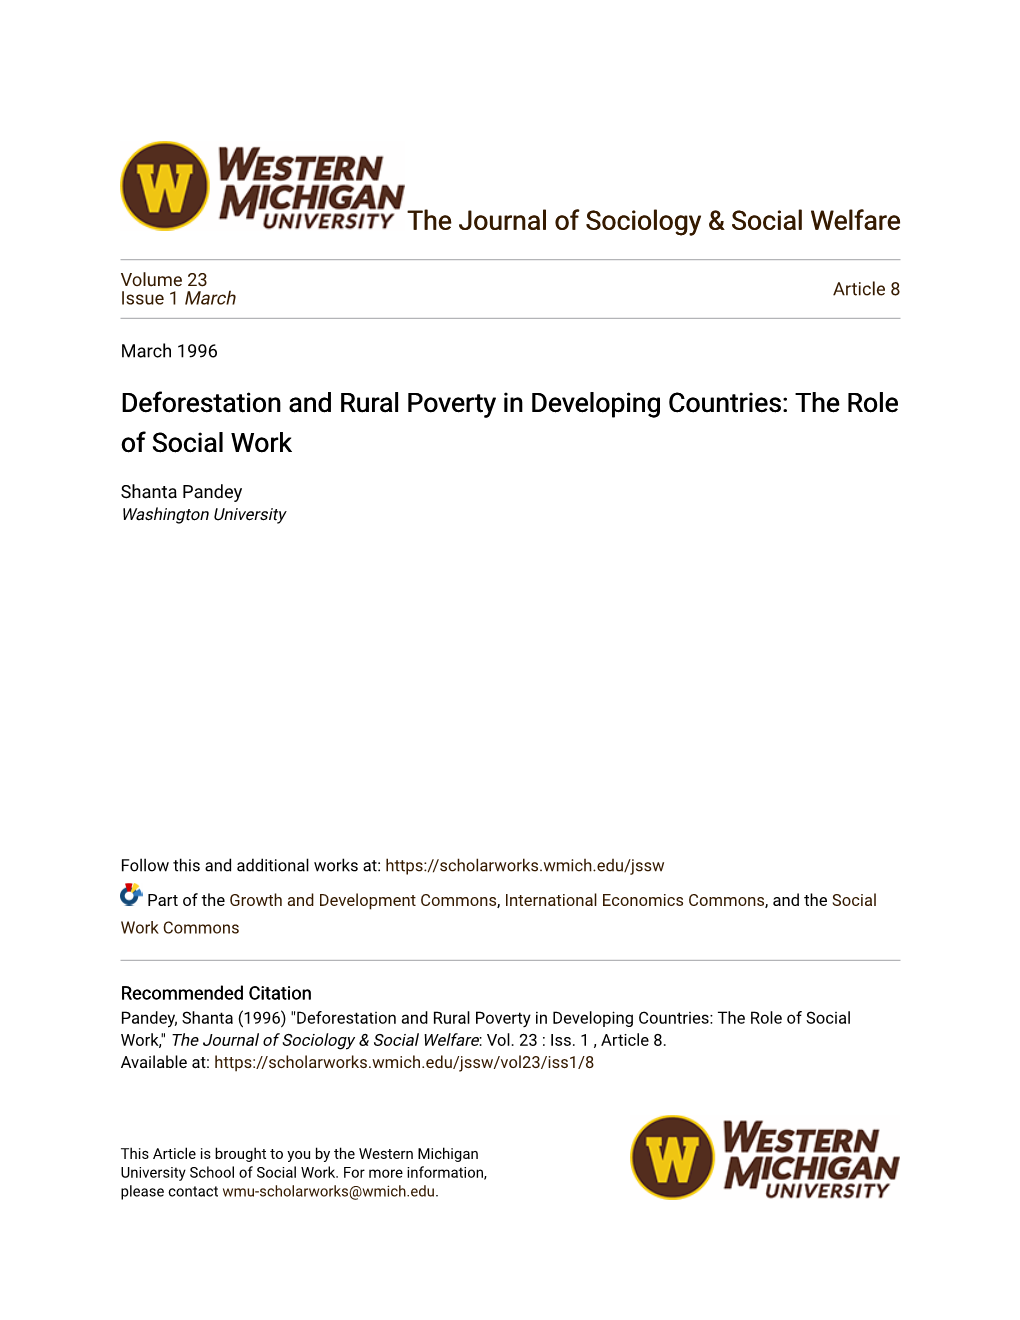 Deforestation and Rural Poverty in Developing Countries: the Role of Social Work